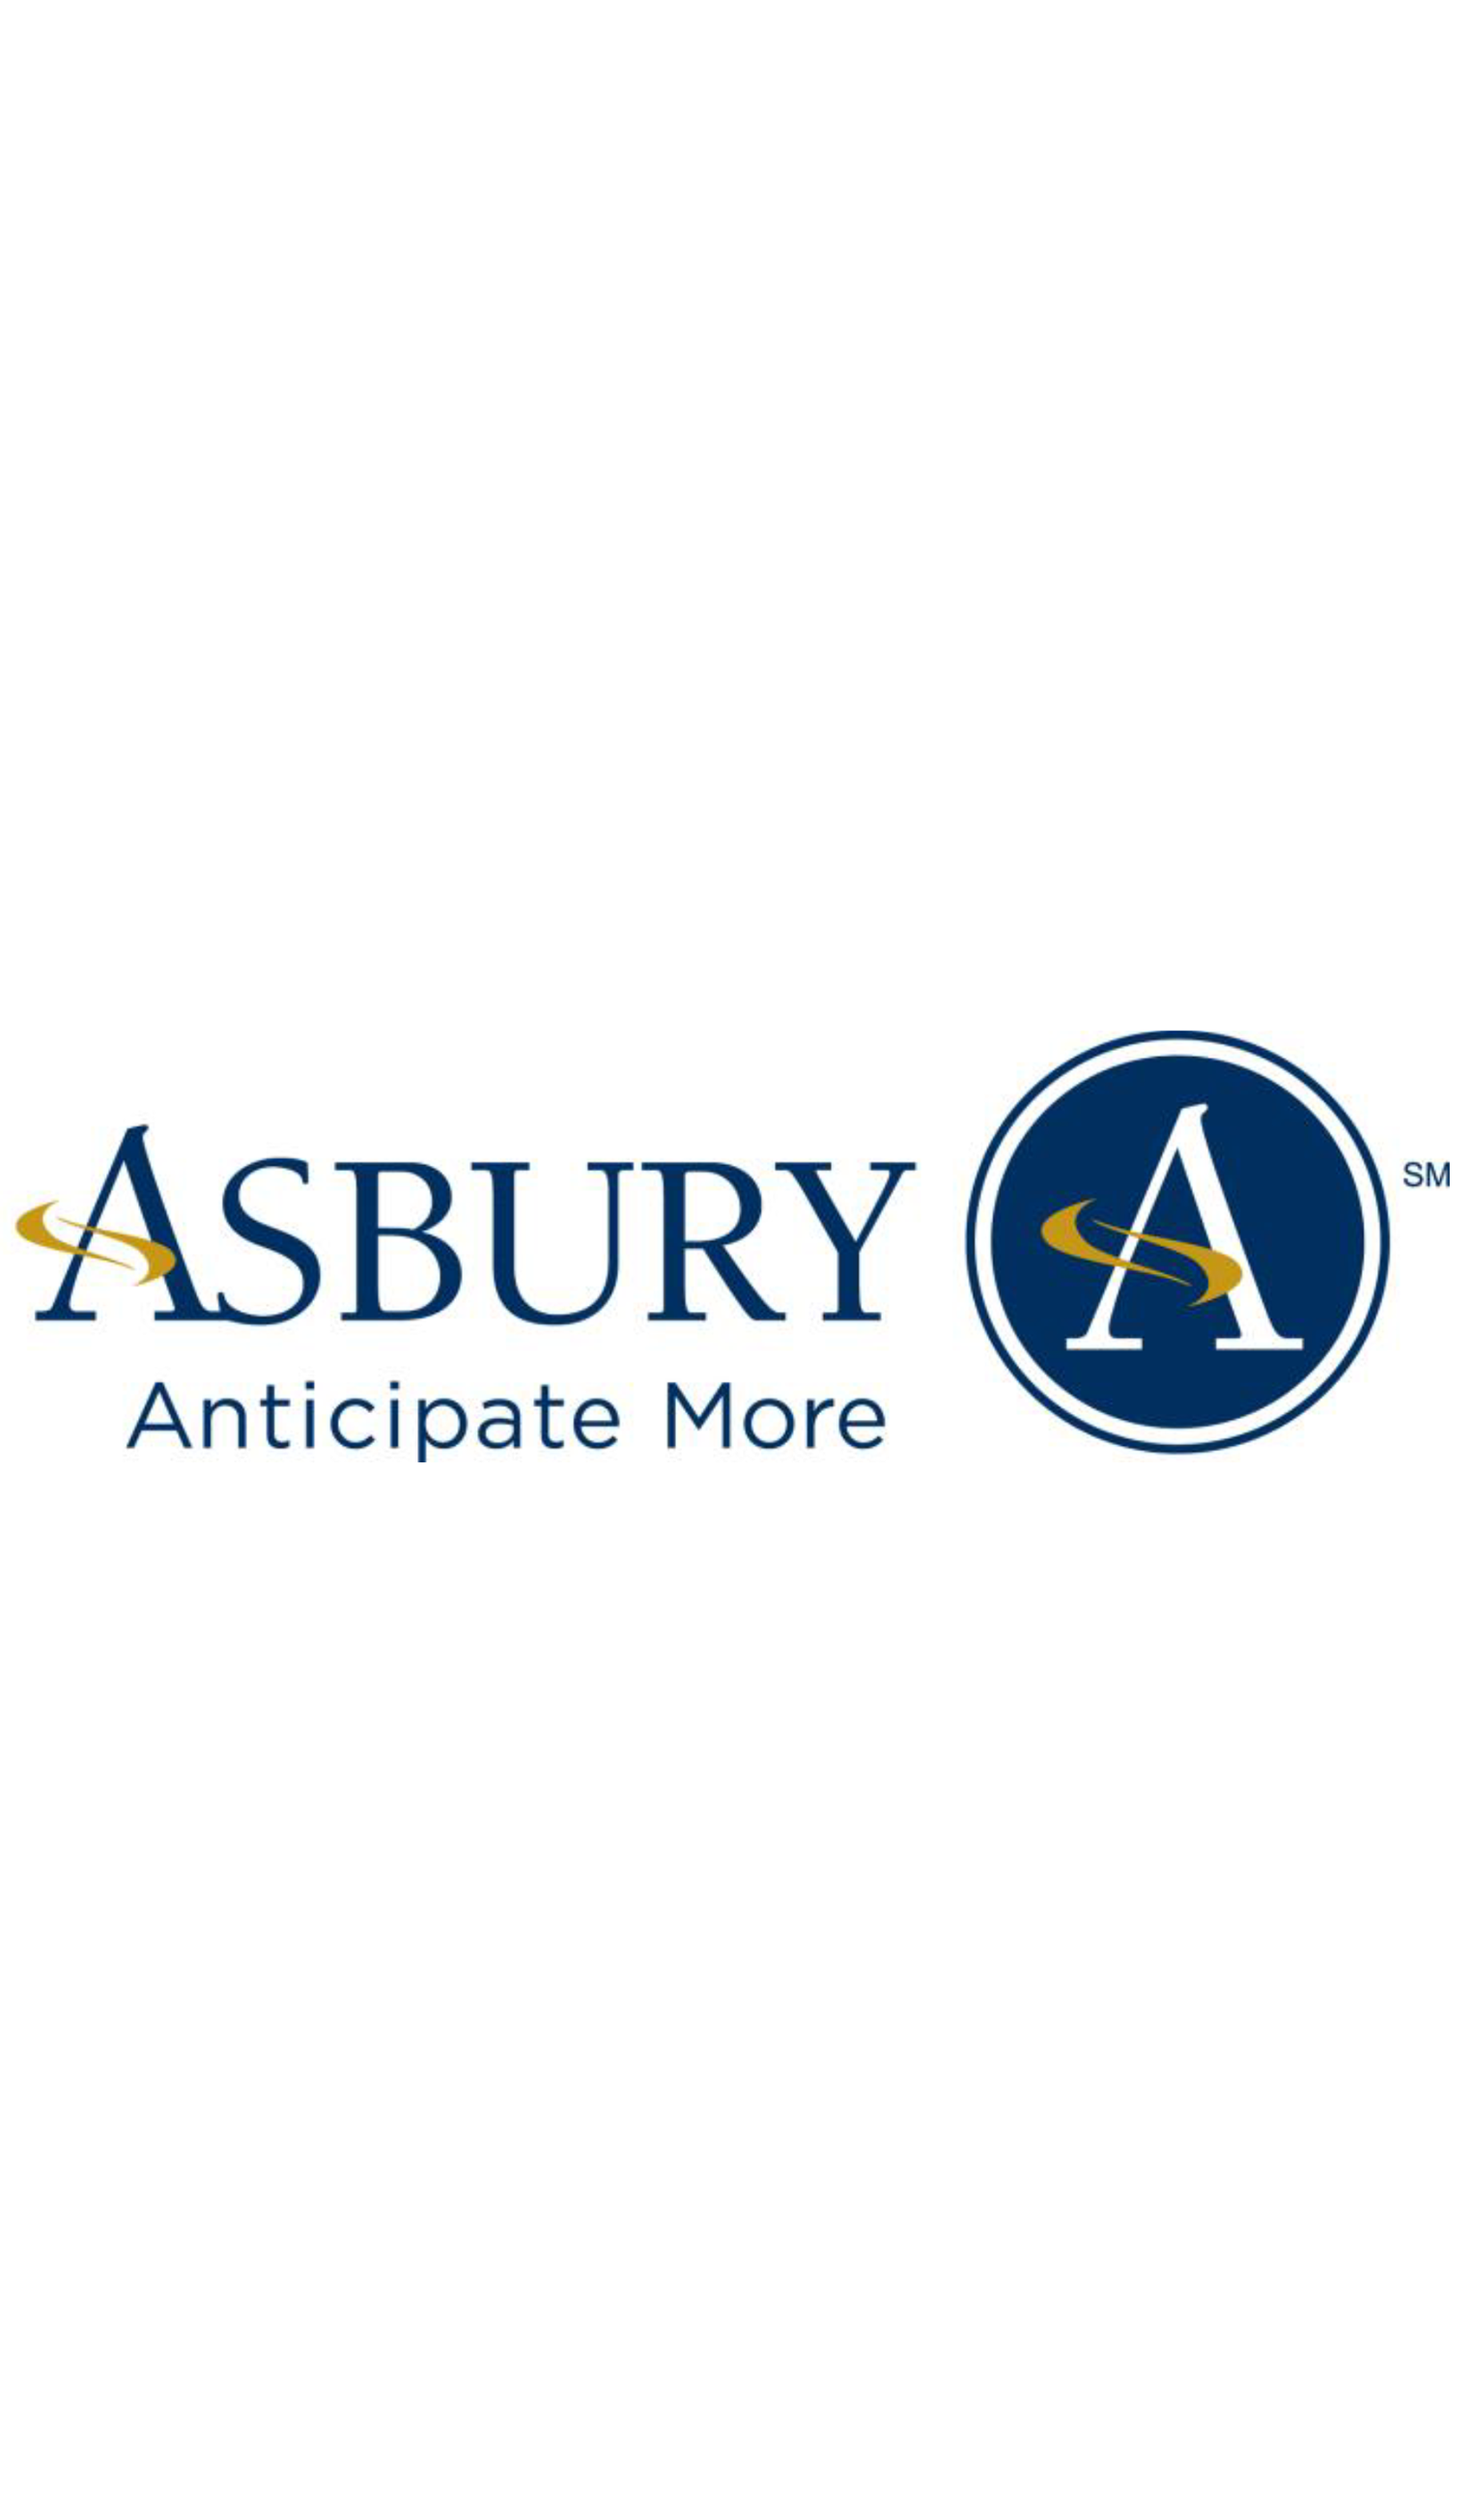 Fortune gives Asbury award for best workplace for aging services